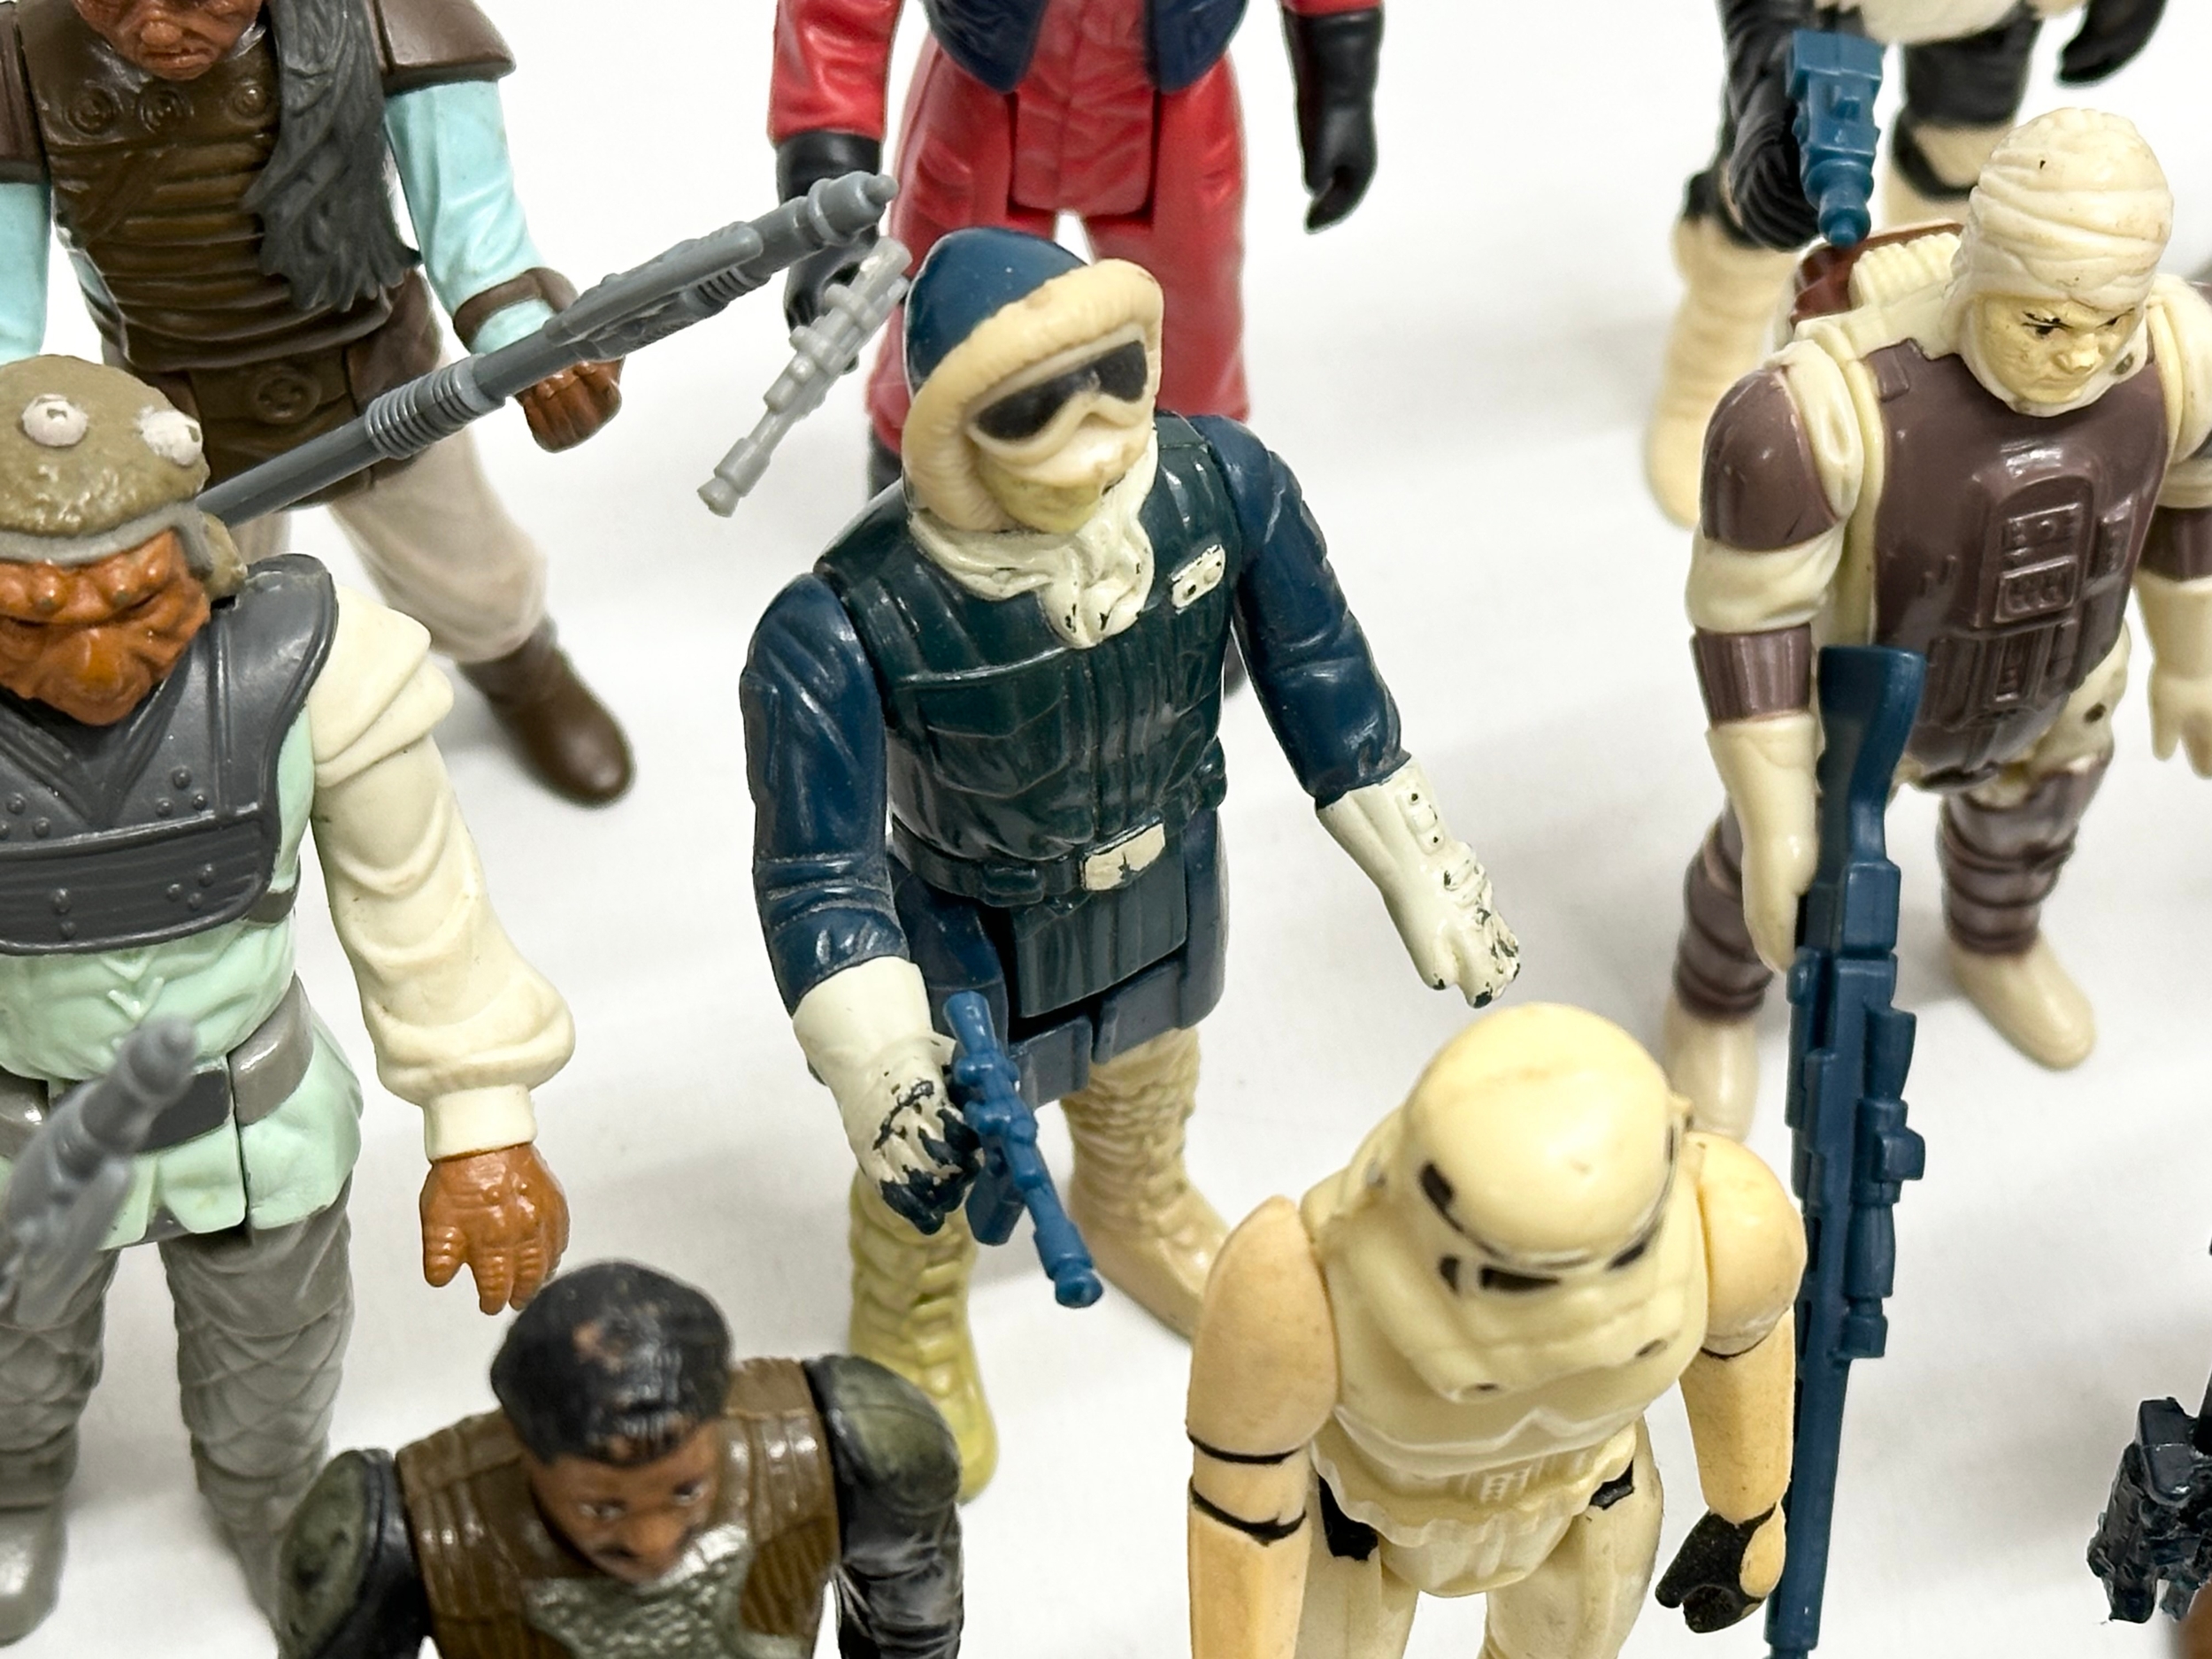 A collection of 1970’s/80’s Star Wars action figures and weapons. - Image 19 of 24